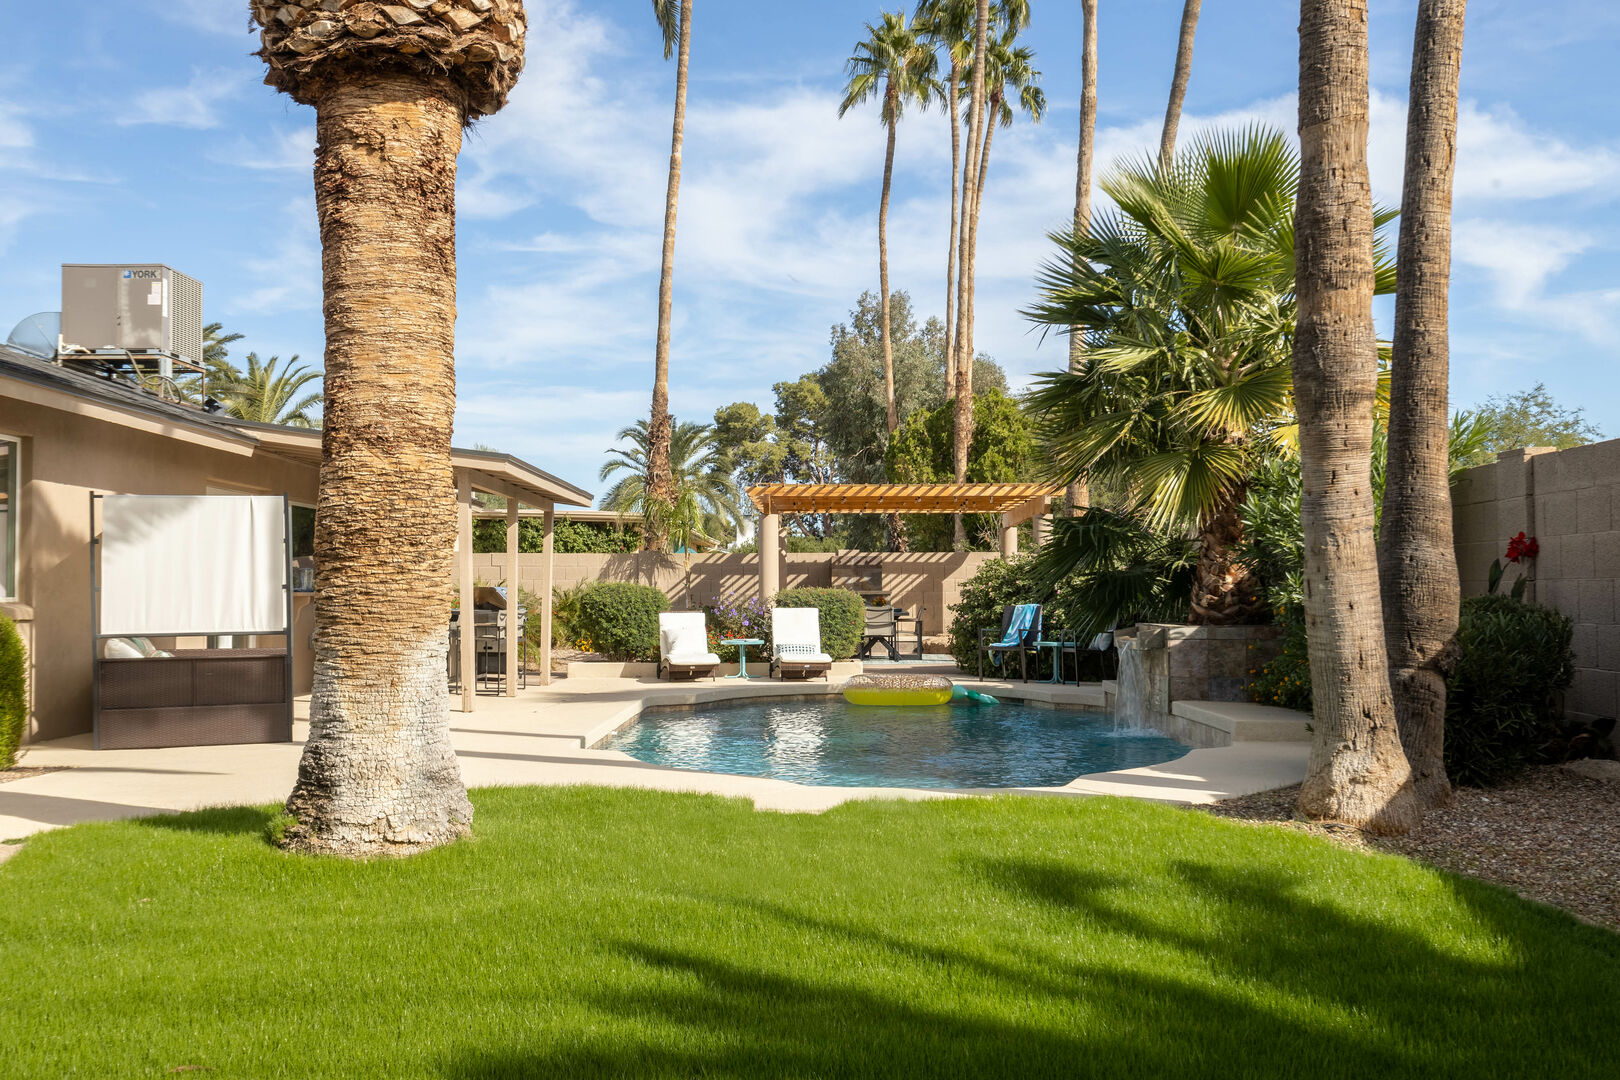 Green Area w/ Palms Overlooking Pool Area